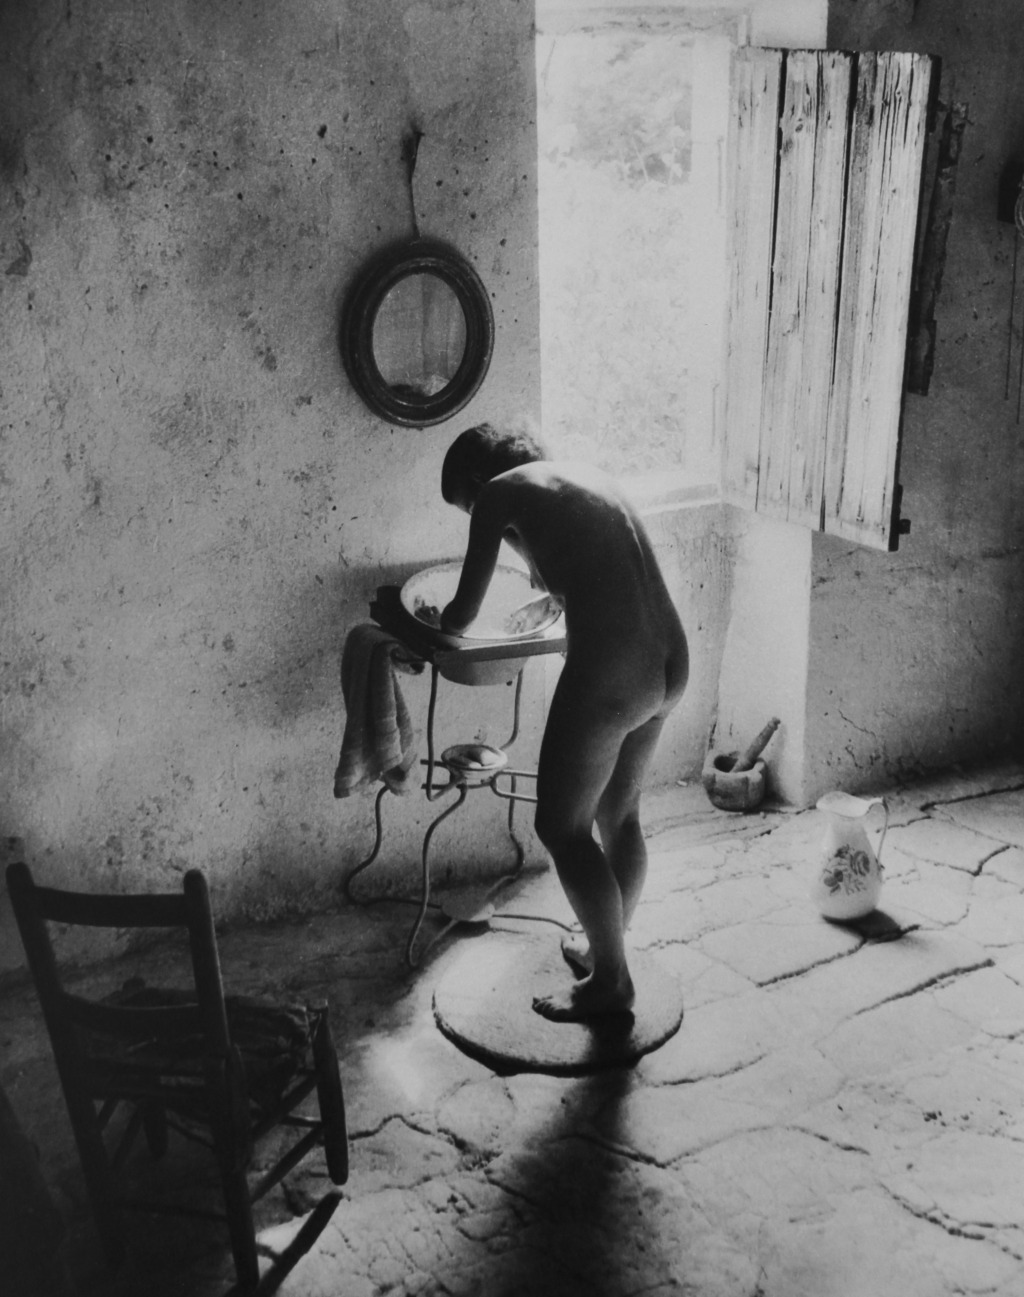 Willy Ronis, Le nu provençale, 1949
Gelatin silver print, printed 1981
32,5 x 25,5 cm (image) / 39,5 x 30,5 cm (sheet)
Signed by photographer recto und captioned, dated, stamped verso